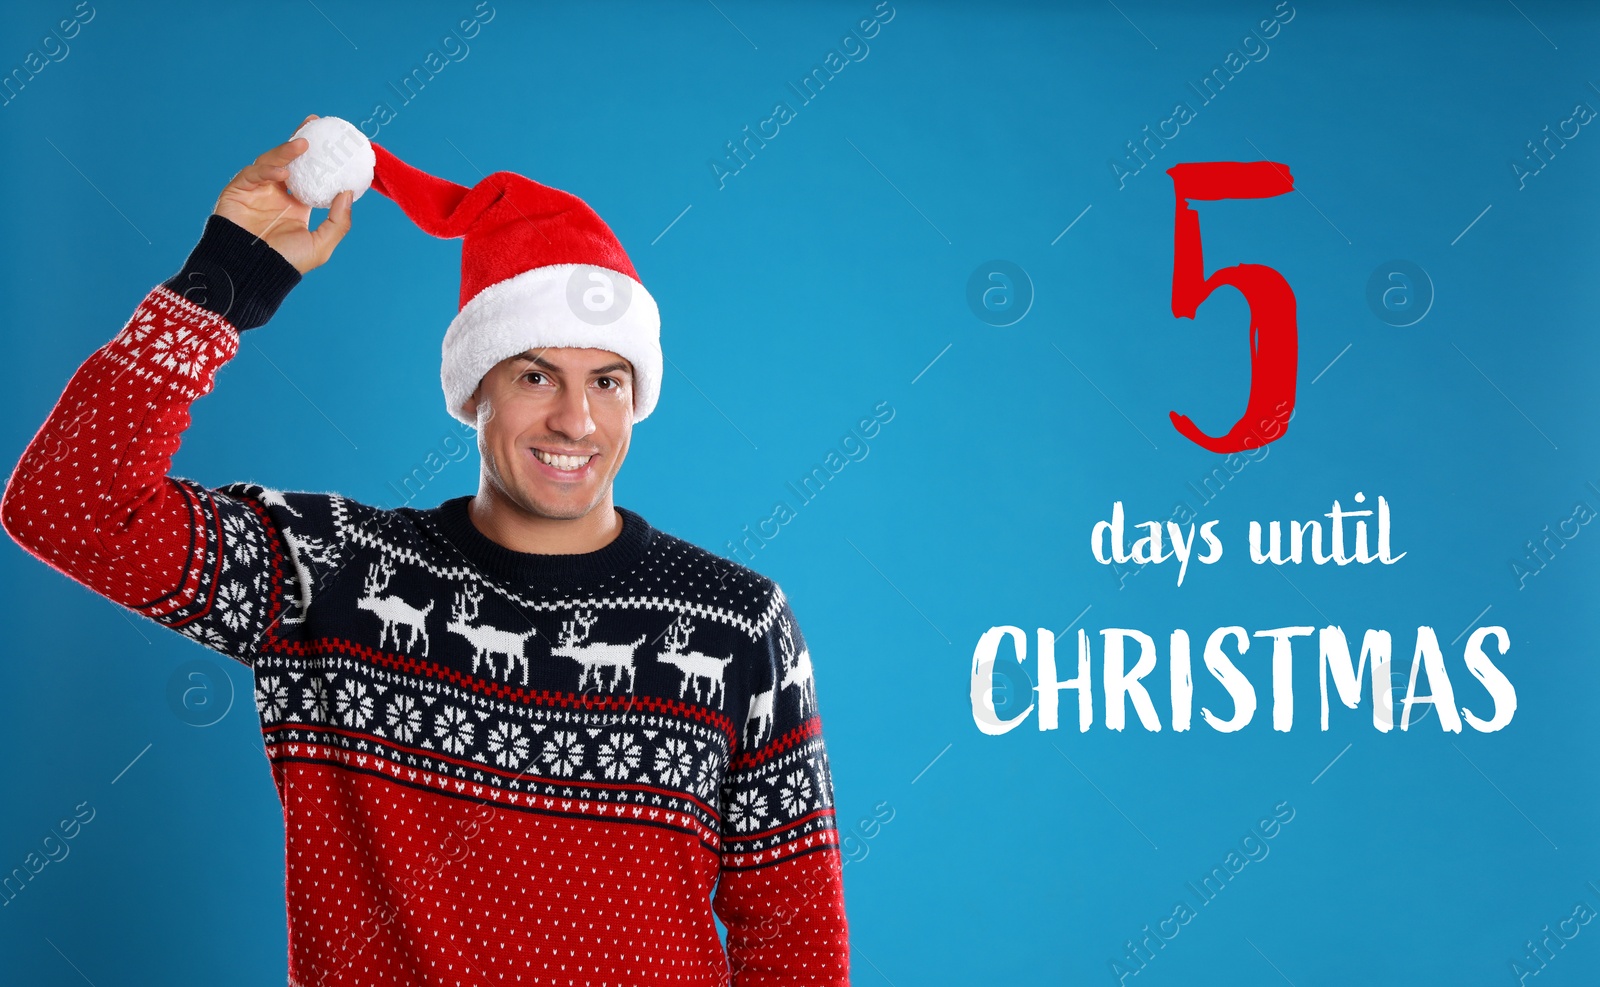 Image of Christmas countdown. Happy man wearing Santa hat on blue background near text